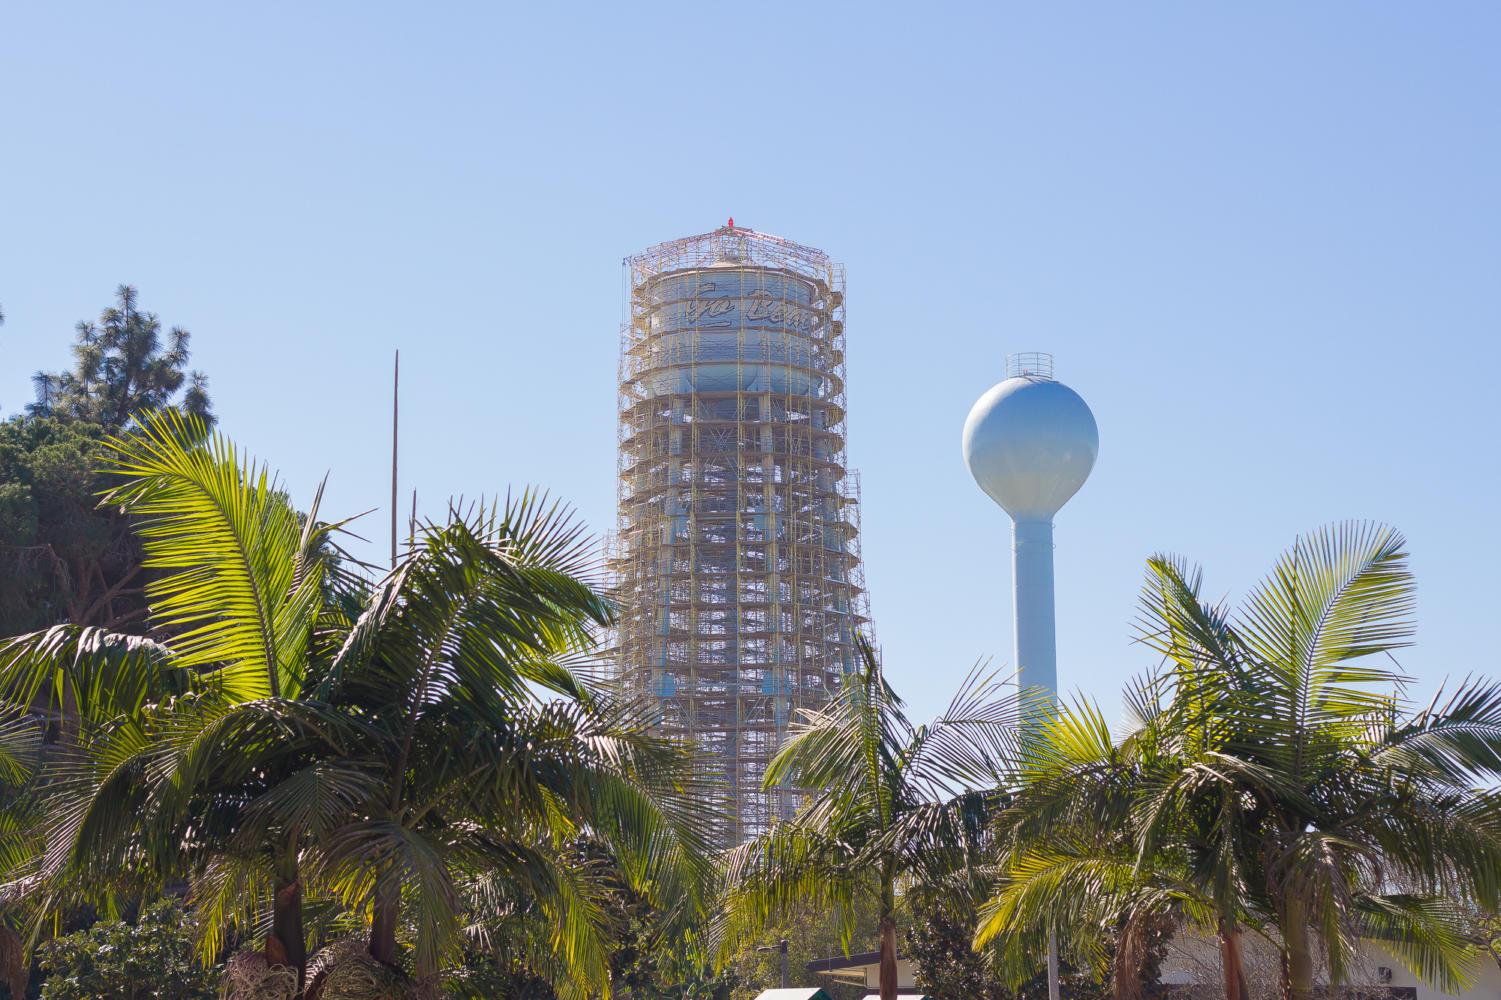 The water tower at Cal State Long Beach is currently undergoing routine maintenance to remove lead based paint located inside of the structure.